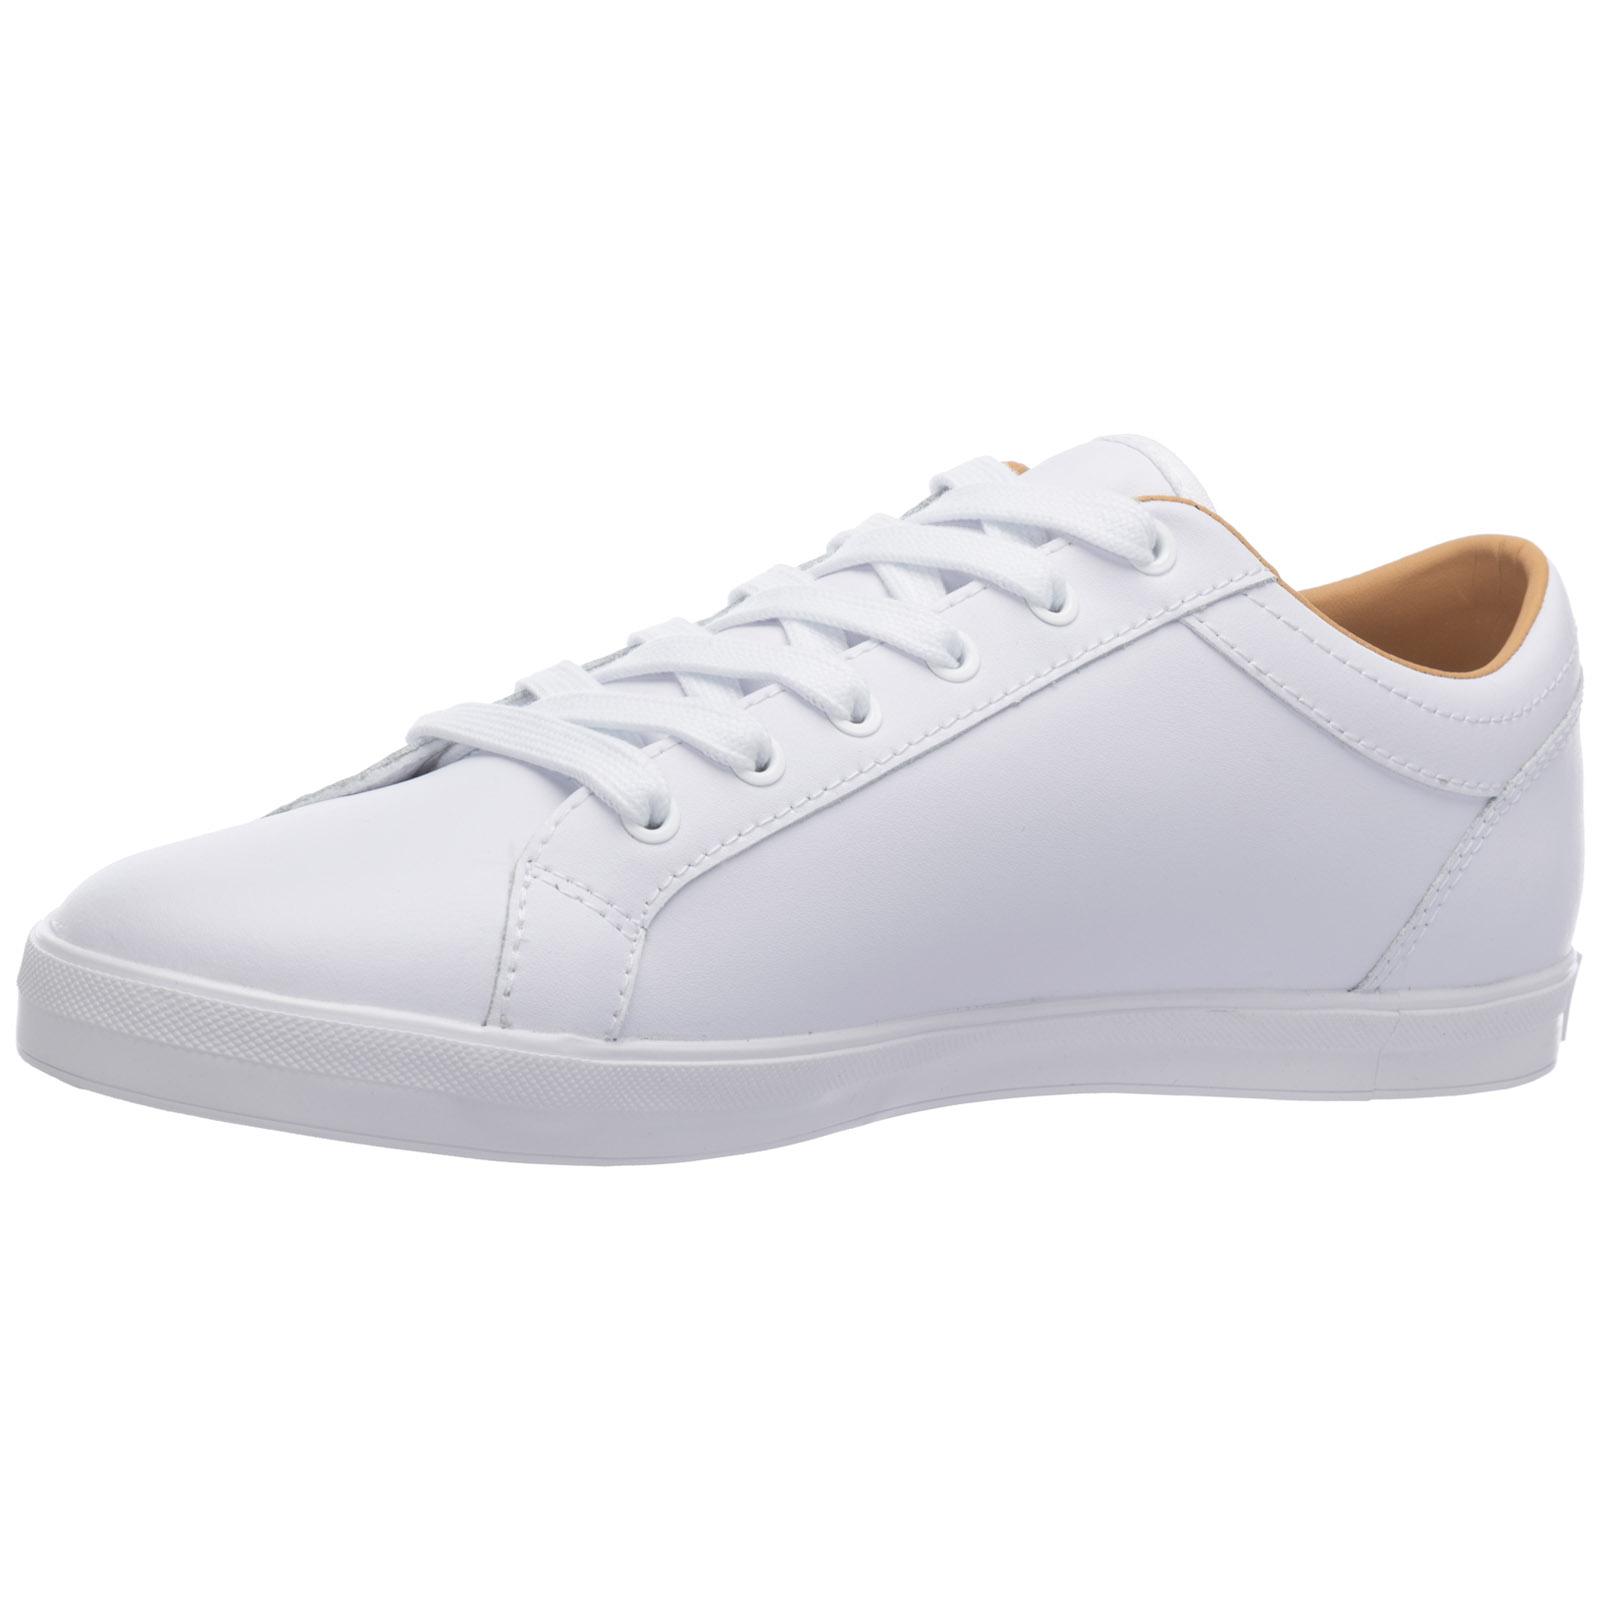 Fred Perry Men's Shoes Leather Trainers Sneakers Baseline in White for ...